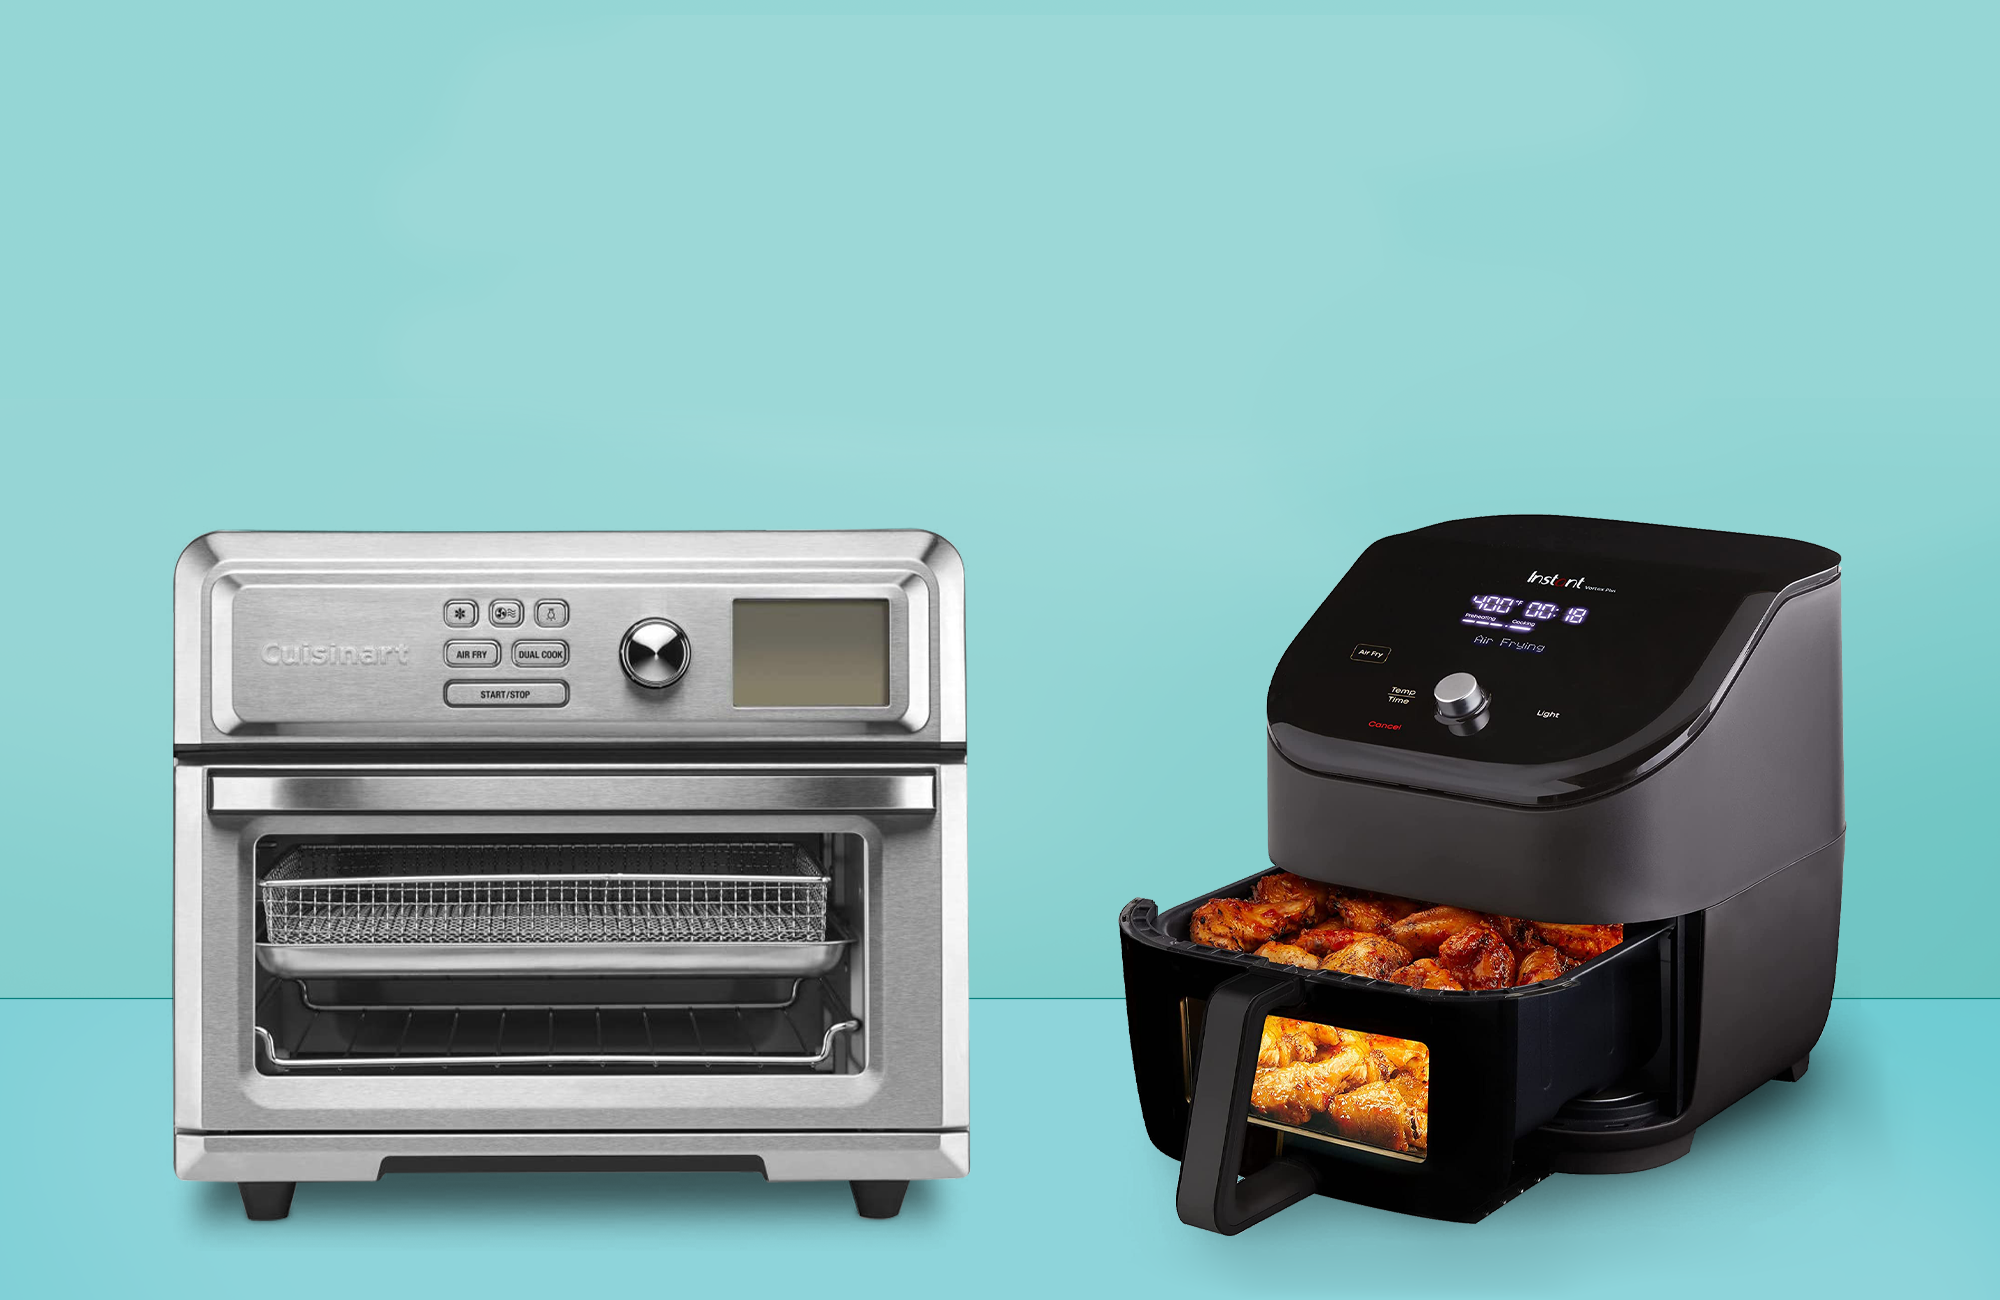 Ovens with air fryers: What you need to know - Reviewed